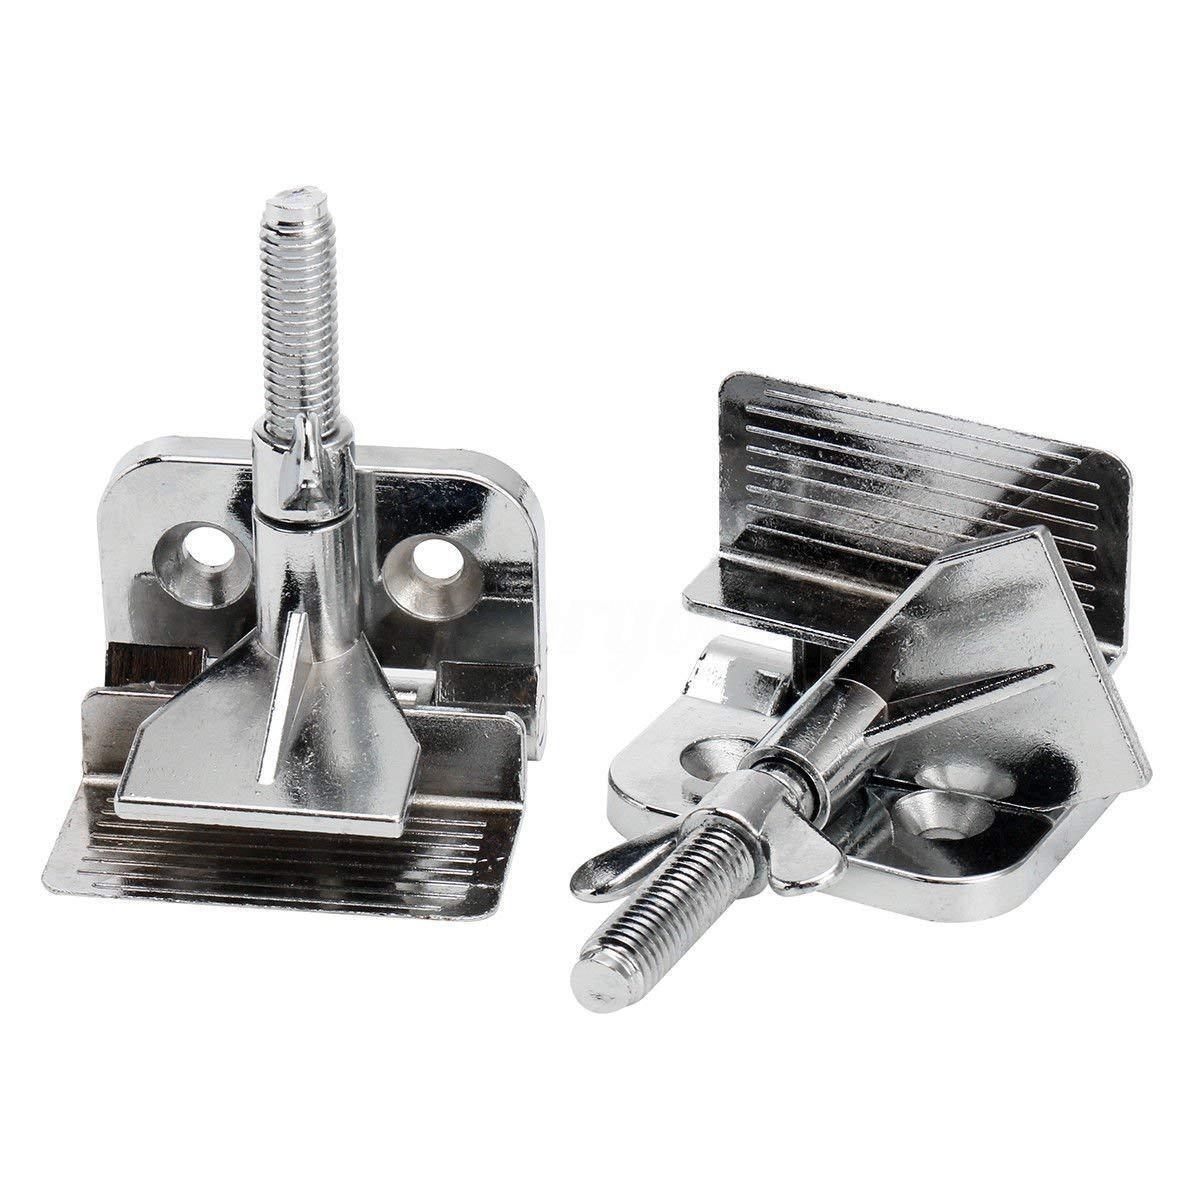 2pcs Screen Printing Butterfly Clamps Silk Screen Press Tool Hinge Clamp Unbranded/Generic 009022